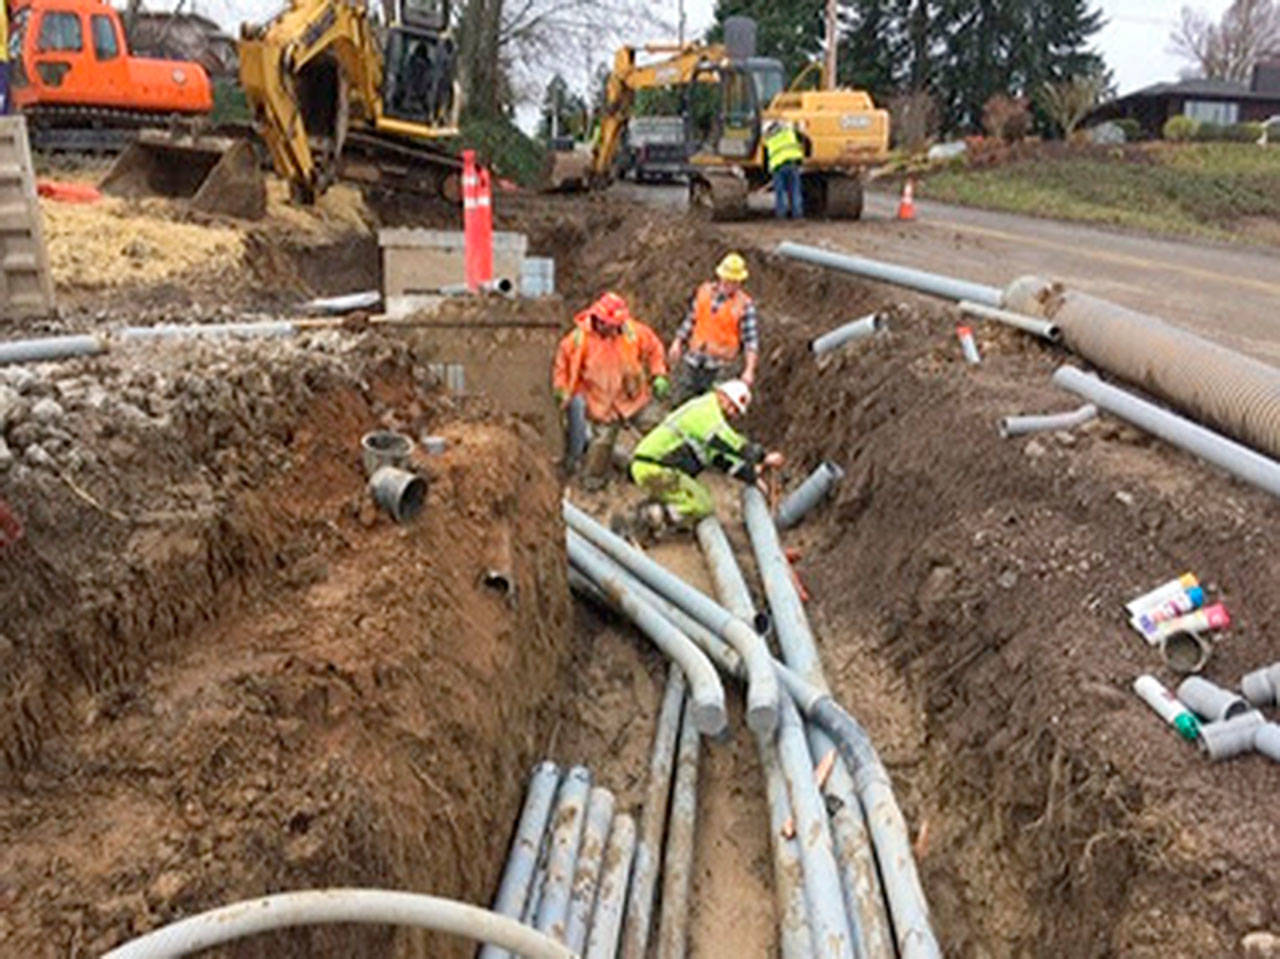 Because of recent rains, crews encounter muddy conditions in the joint utility trench that is being installed as part of the Silverdale Way Road Improvement Project. (Kitsap County Public Works)